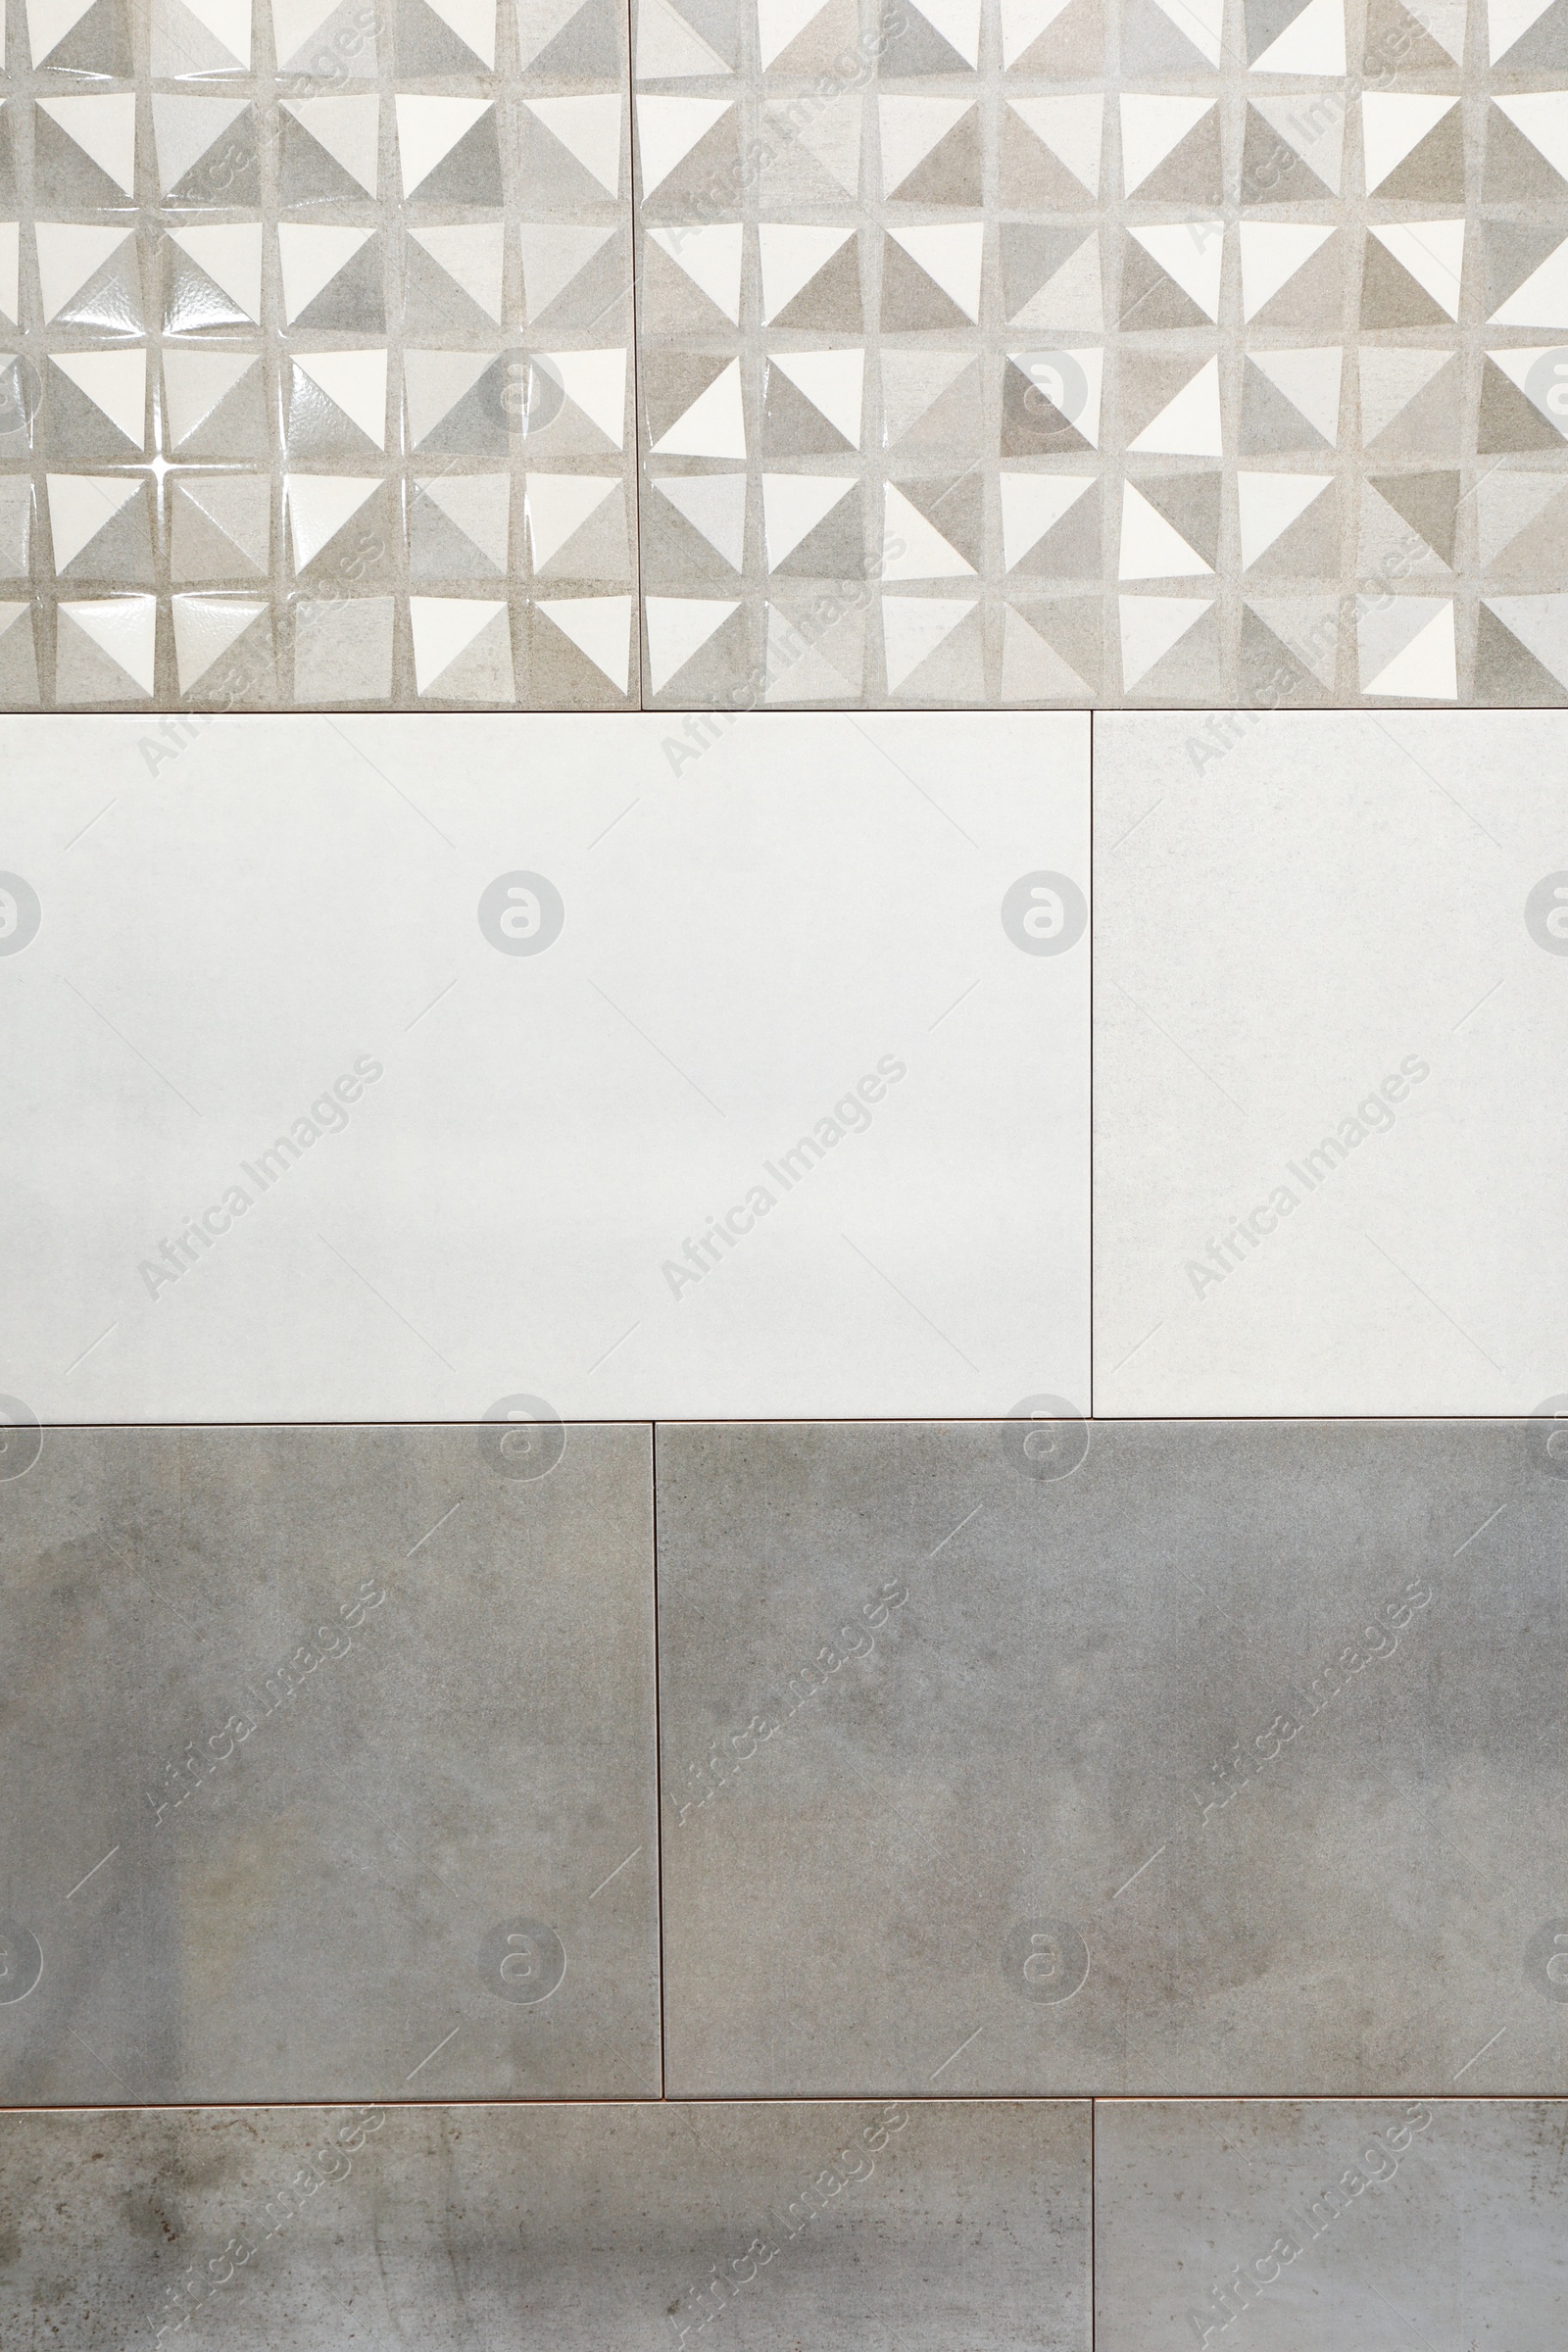 Photo of Different samples of tiles on display in store